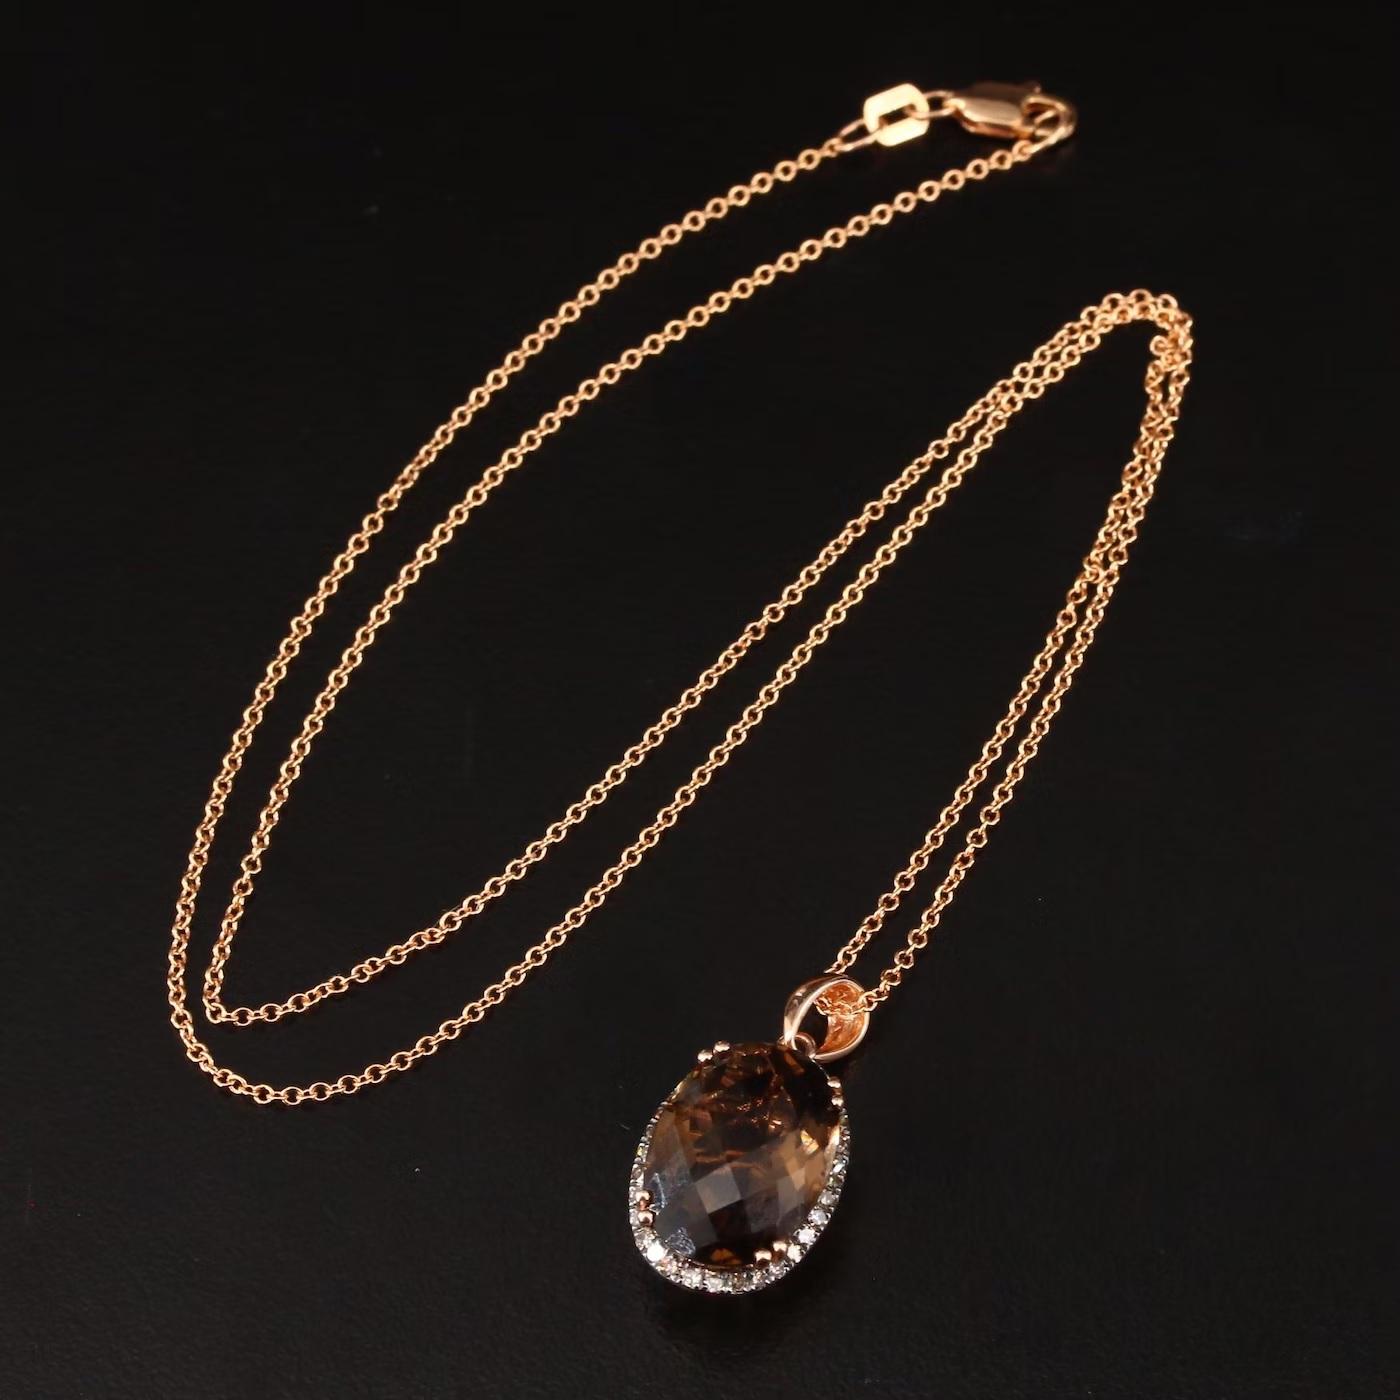 Designer EFFY Necklace, stamped and hallmarks

NEW with tags, Tag Price $3750 

14K Rose gold, stamped 14K

4.35 CWT Chocolate Smoky and Diamond

Necklace chain is also EFFY 14K Rose gold chain, 18 inches

Comes with gift box